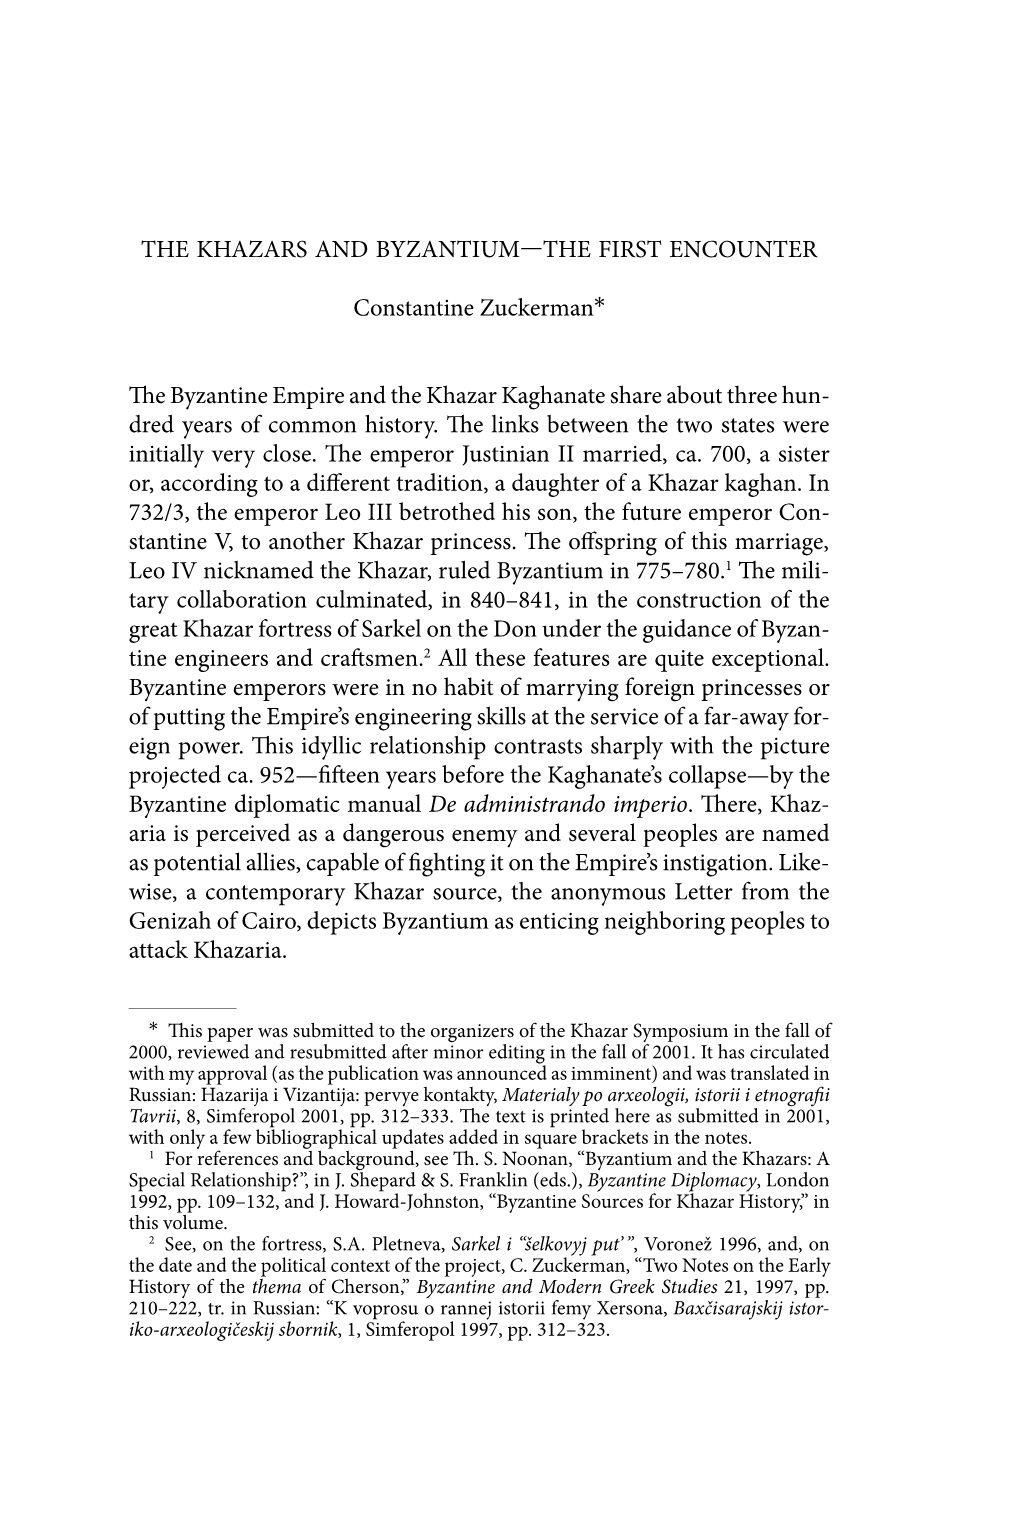 The Khazars and Byzantium—The First Encounter